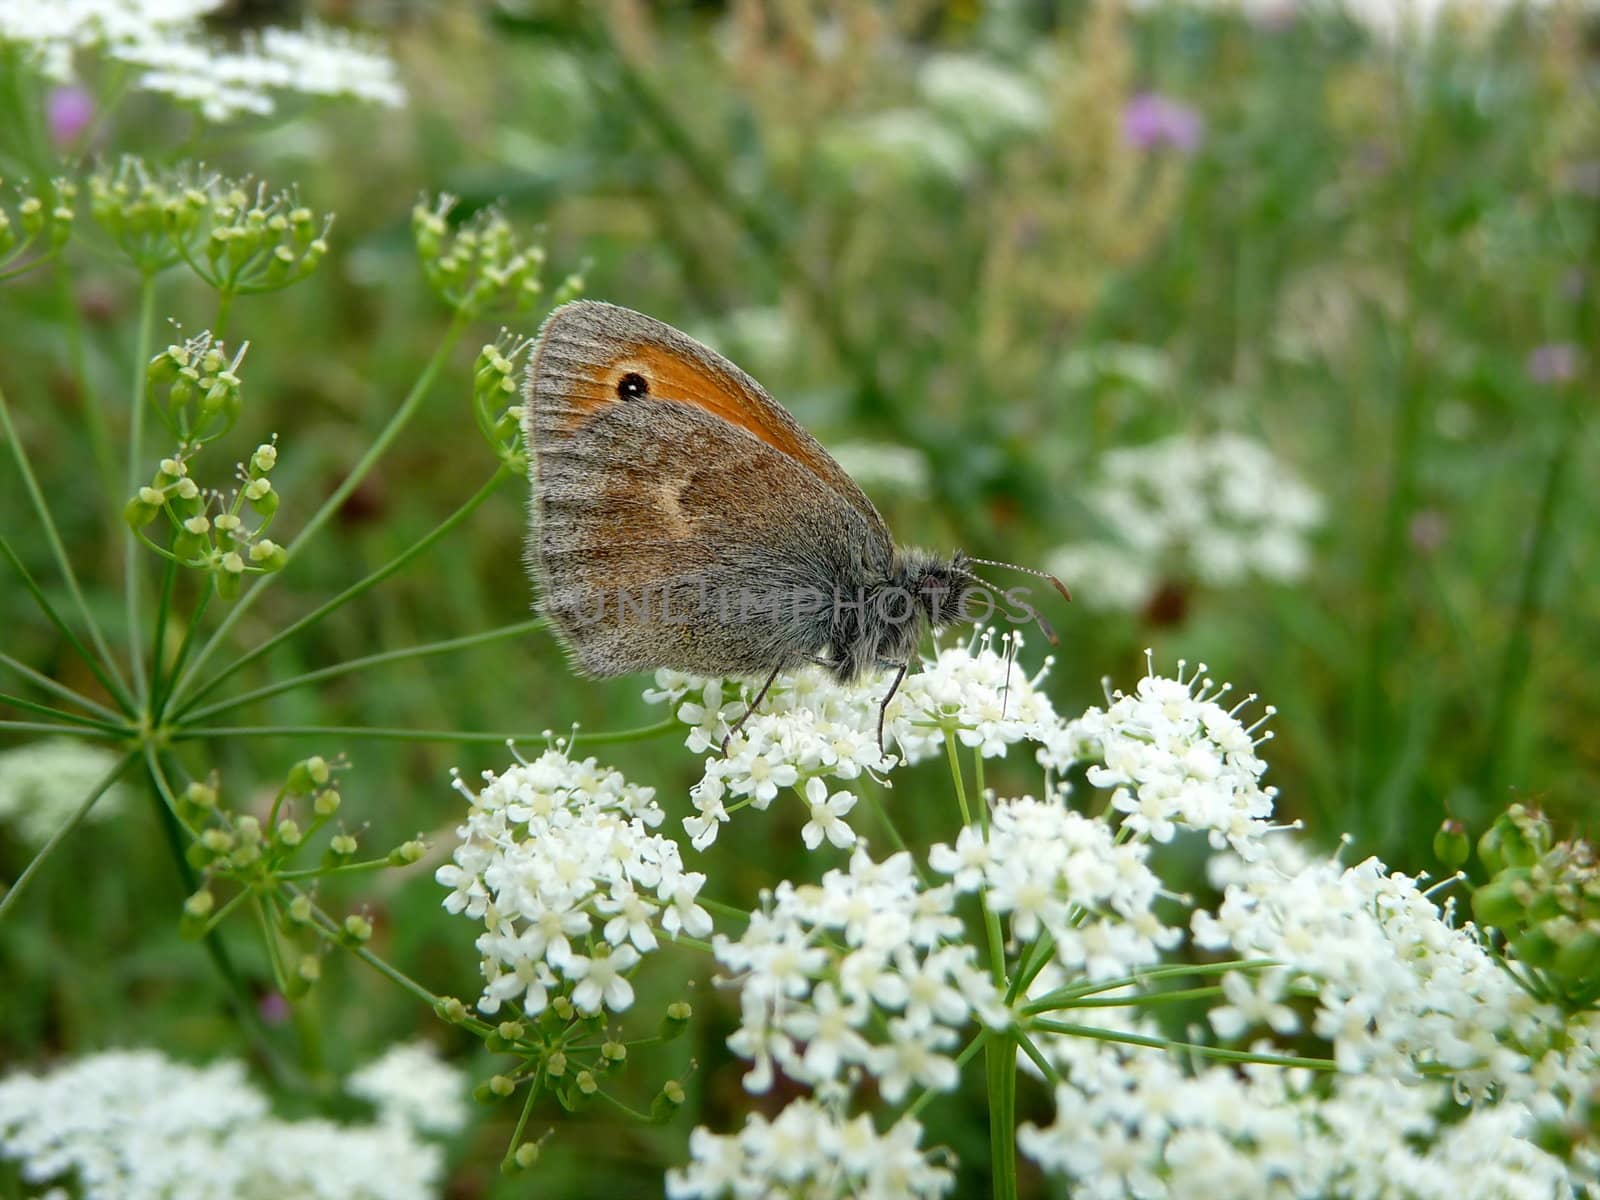 Small butterfly with eye on the wing sits on flowers